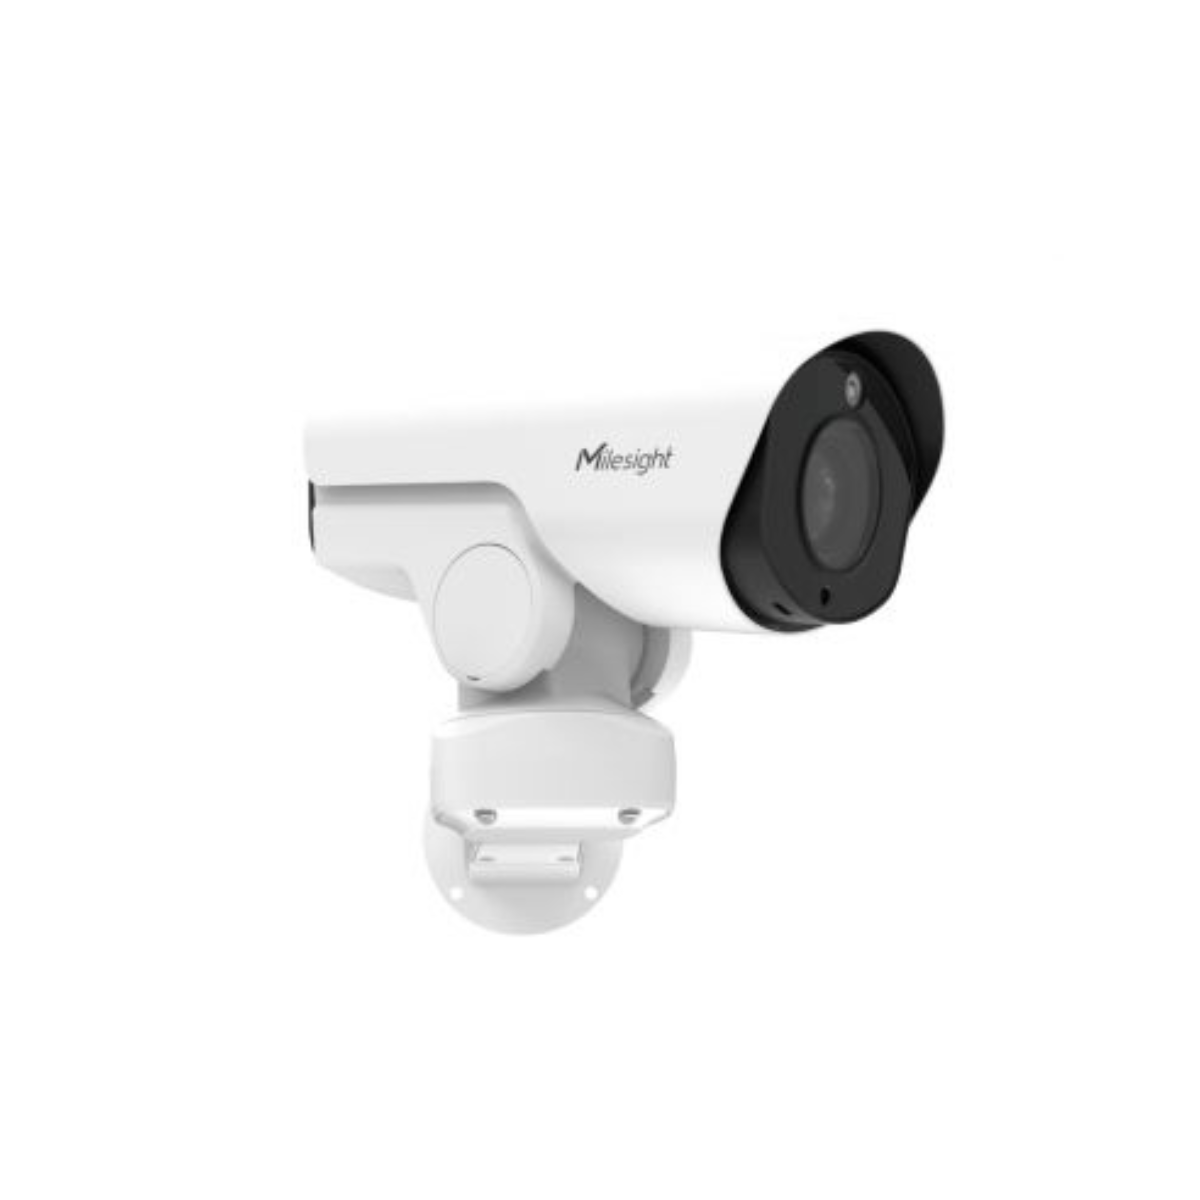 "High-Resolution PTZ Bullet Camera with AI Technology and 23X Optical Zoom"